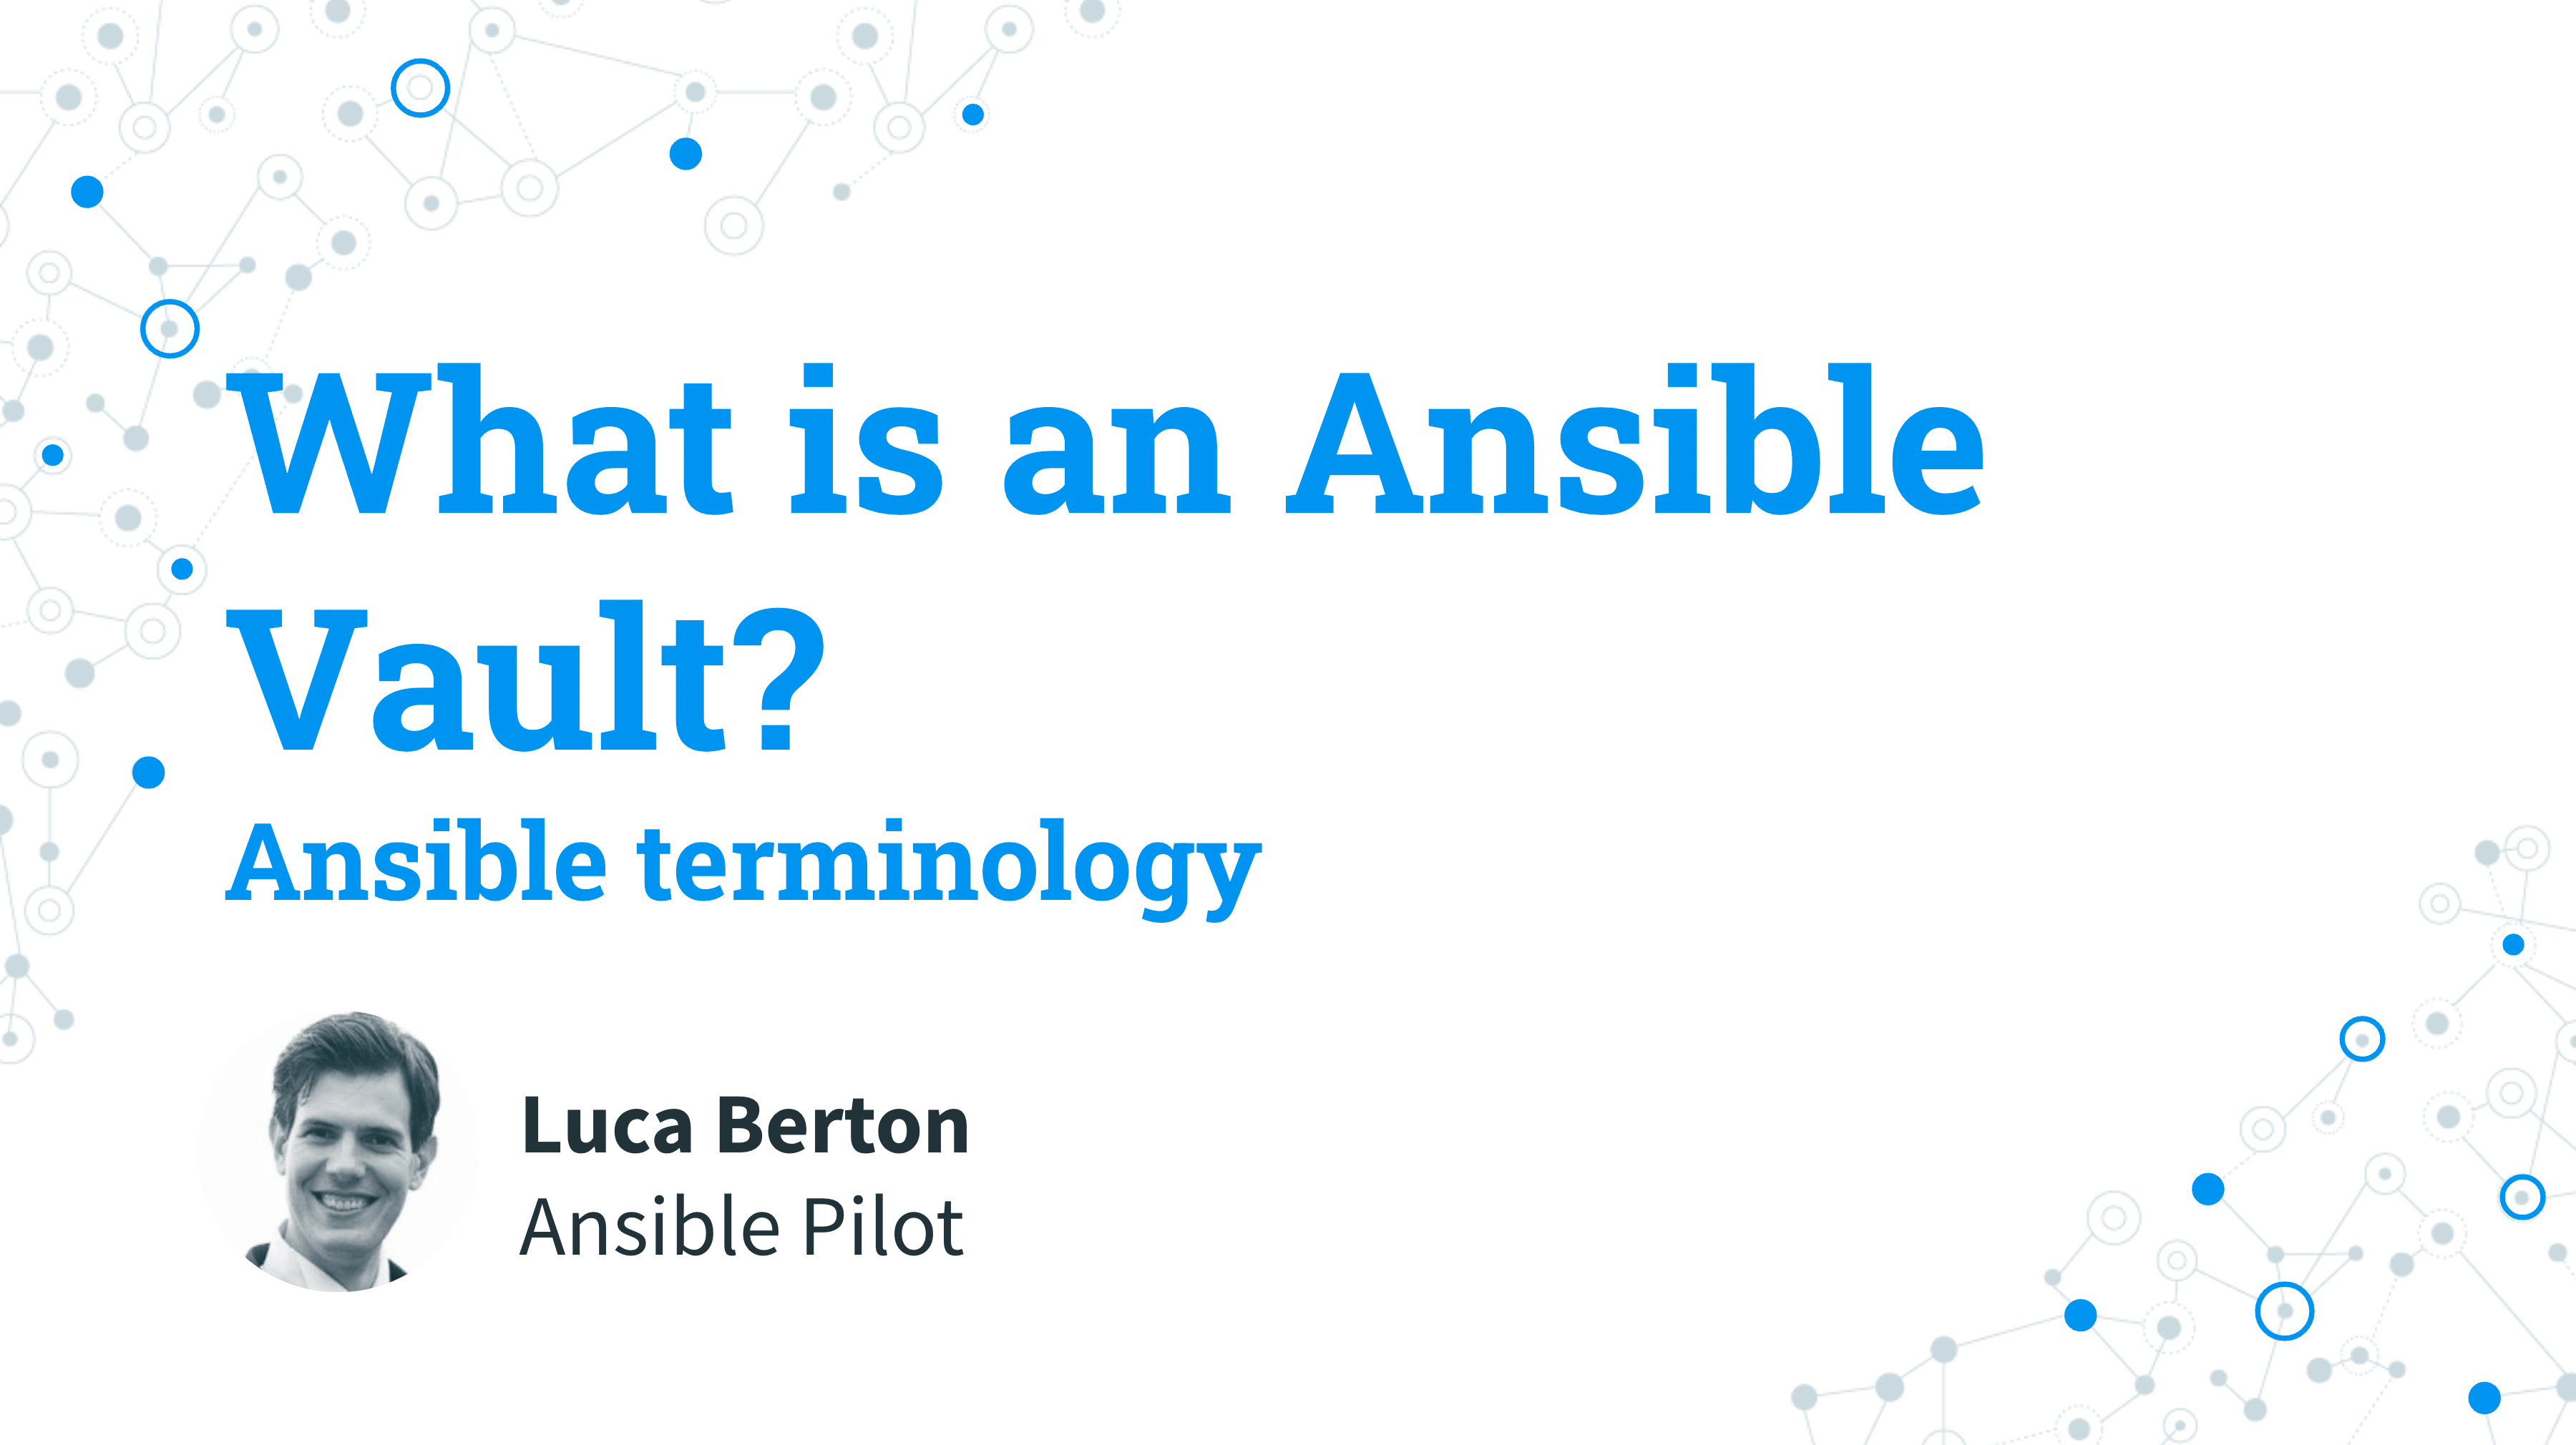 Ansible terminology - What is an Ansible Vault?